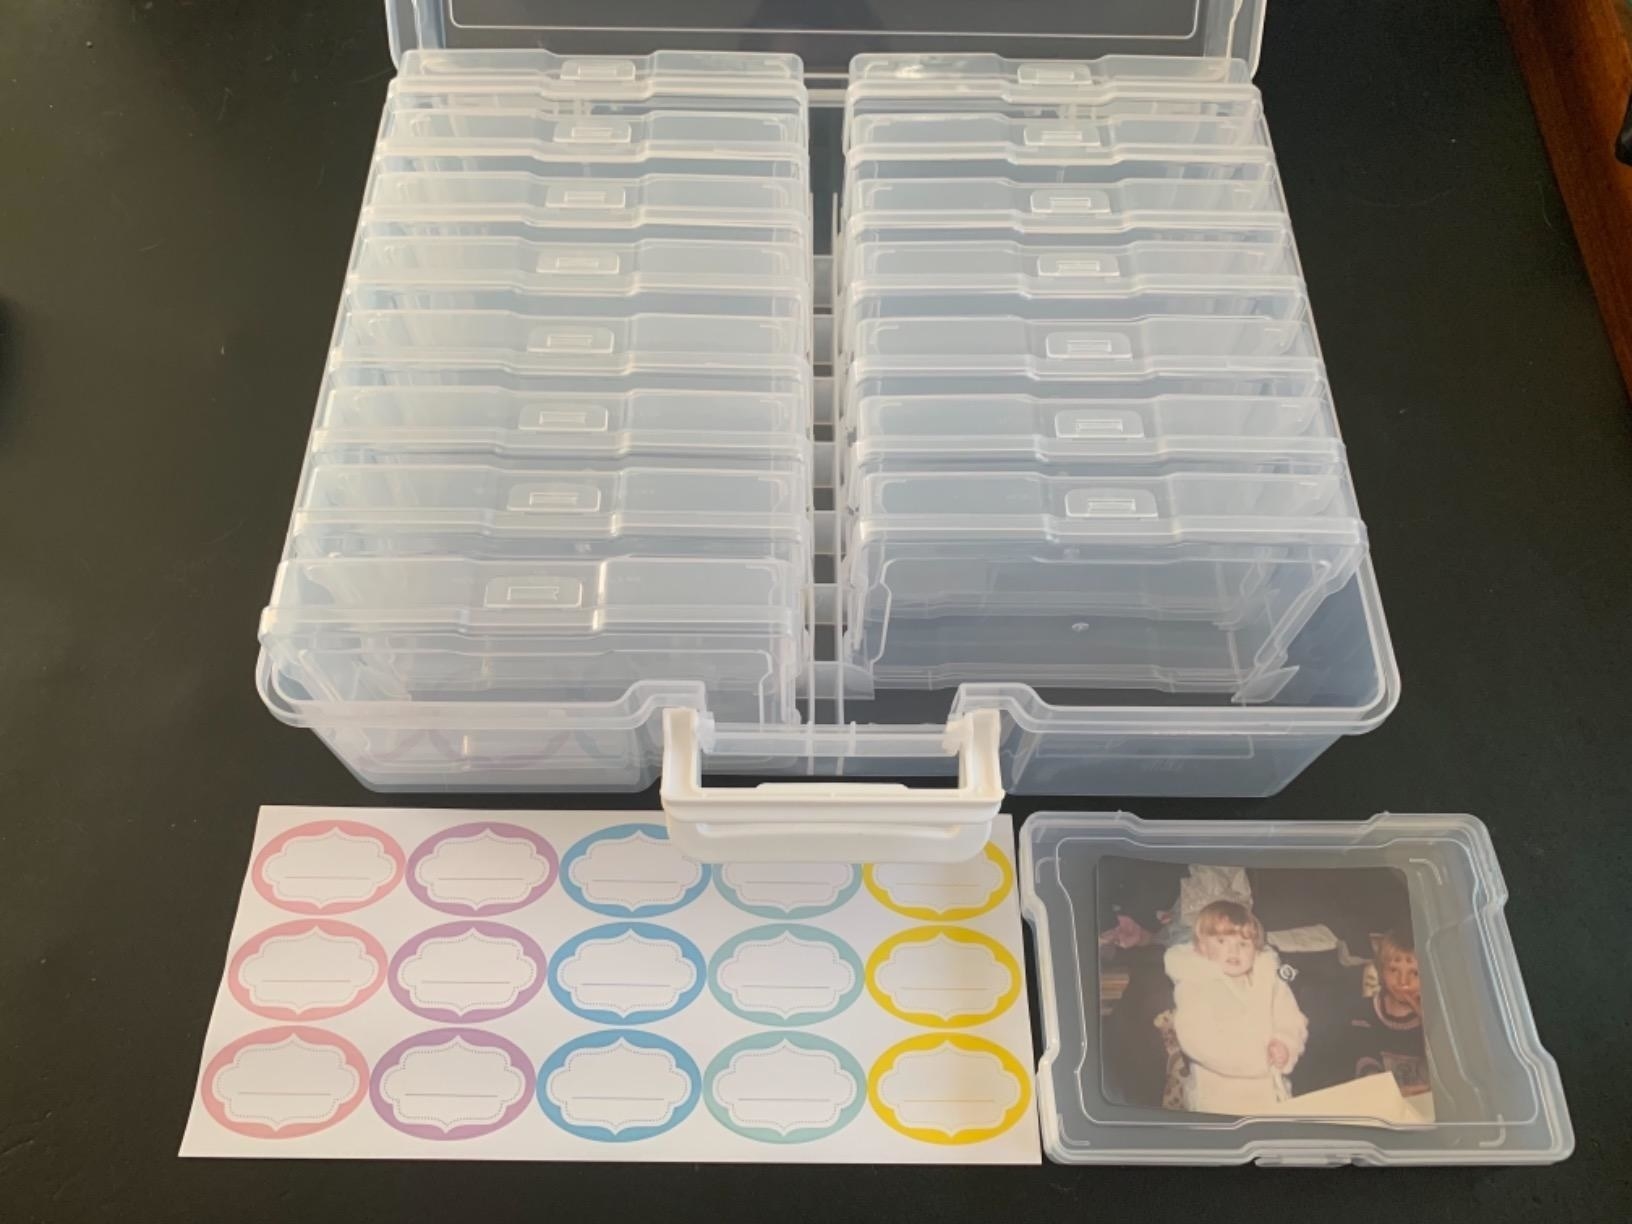 Review photo of the clear photo storage box